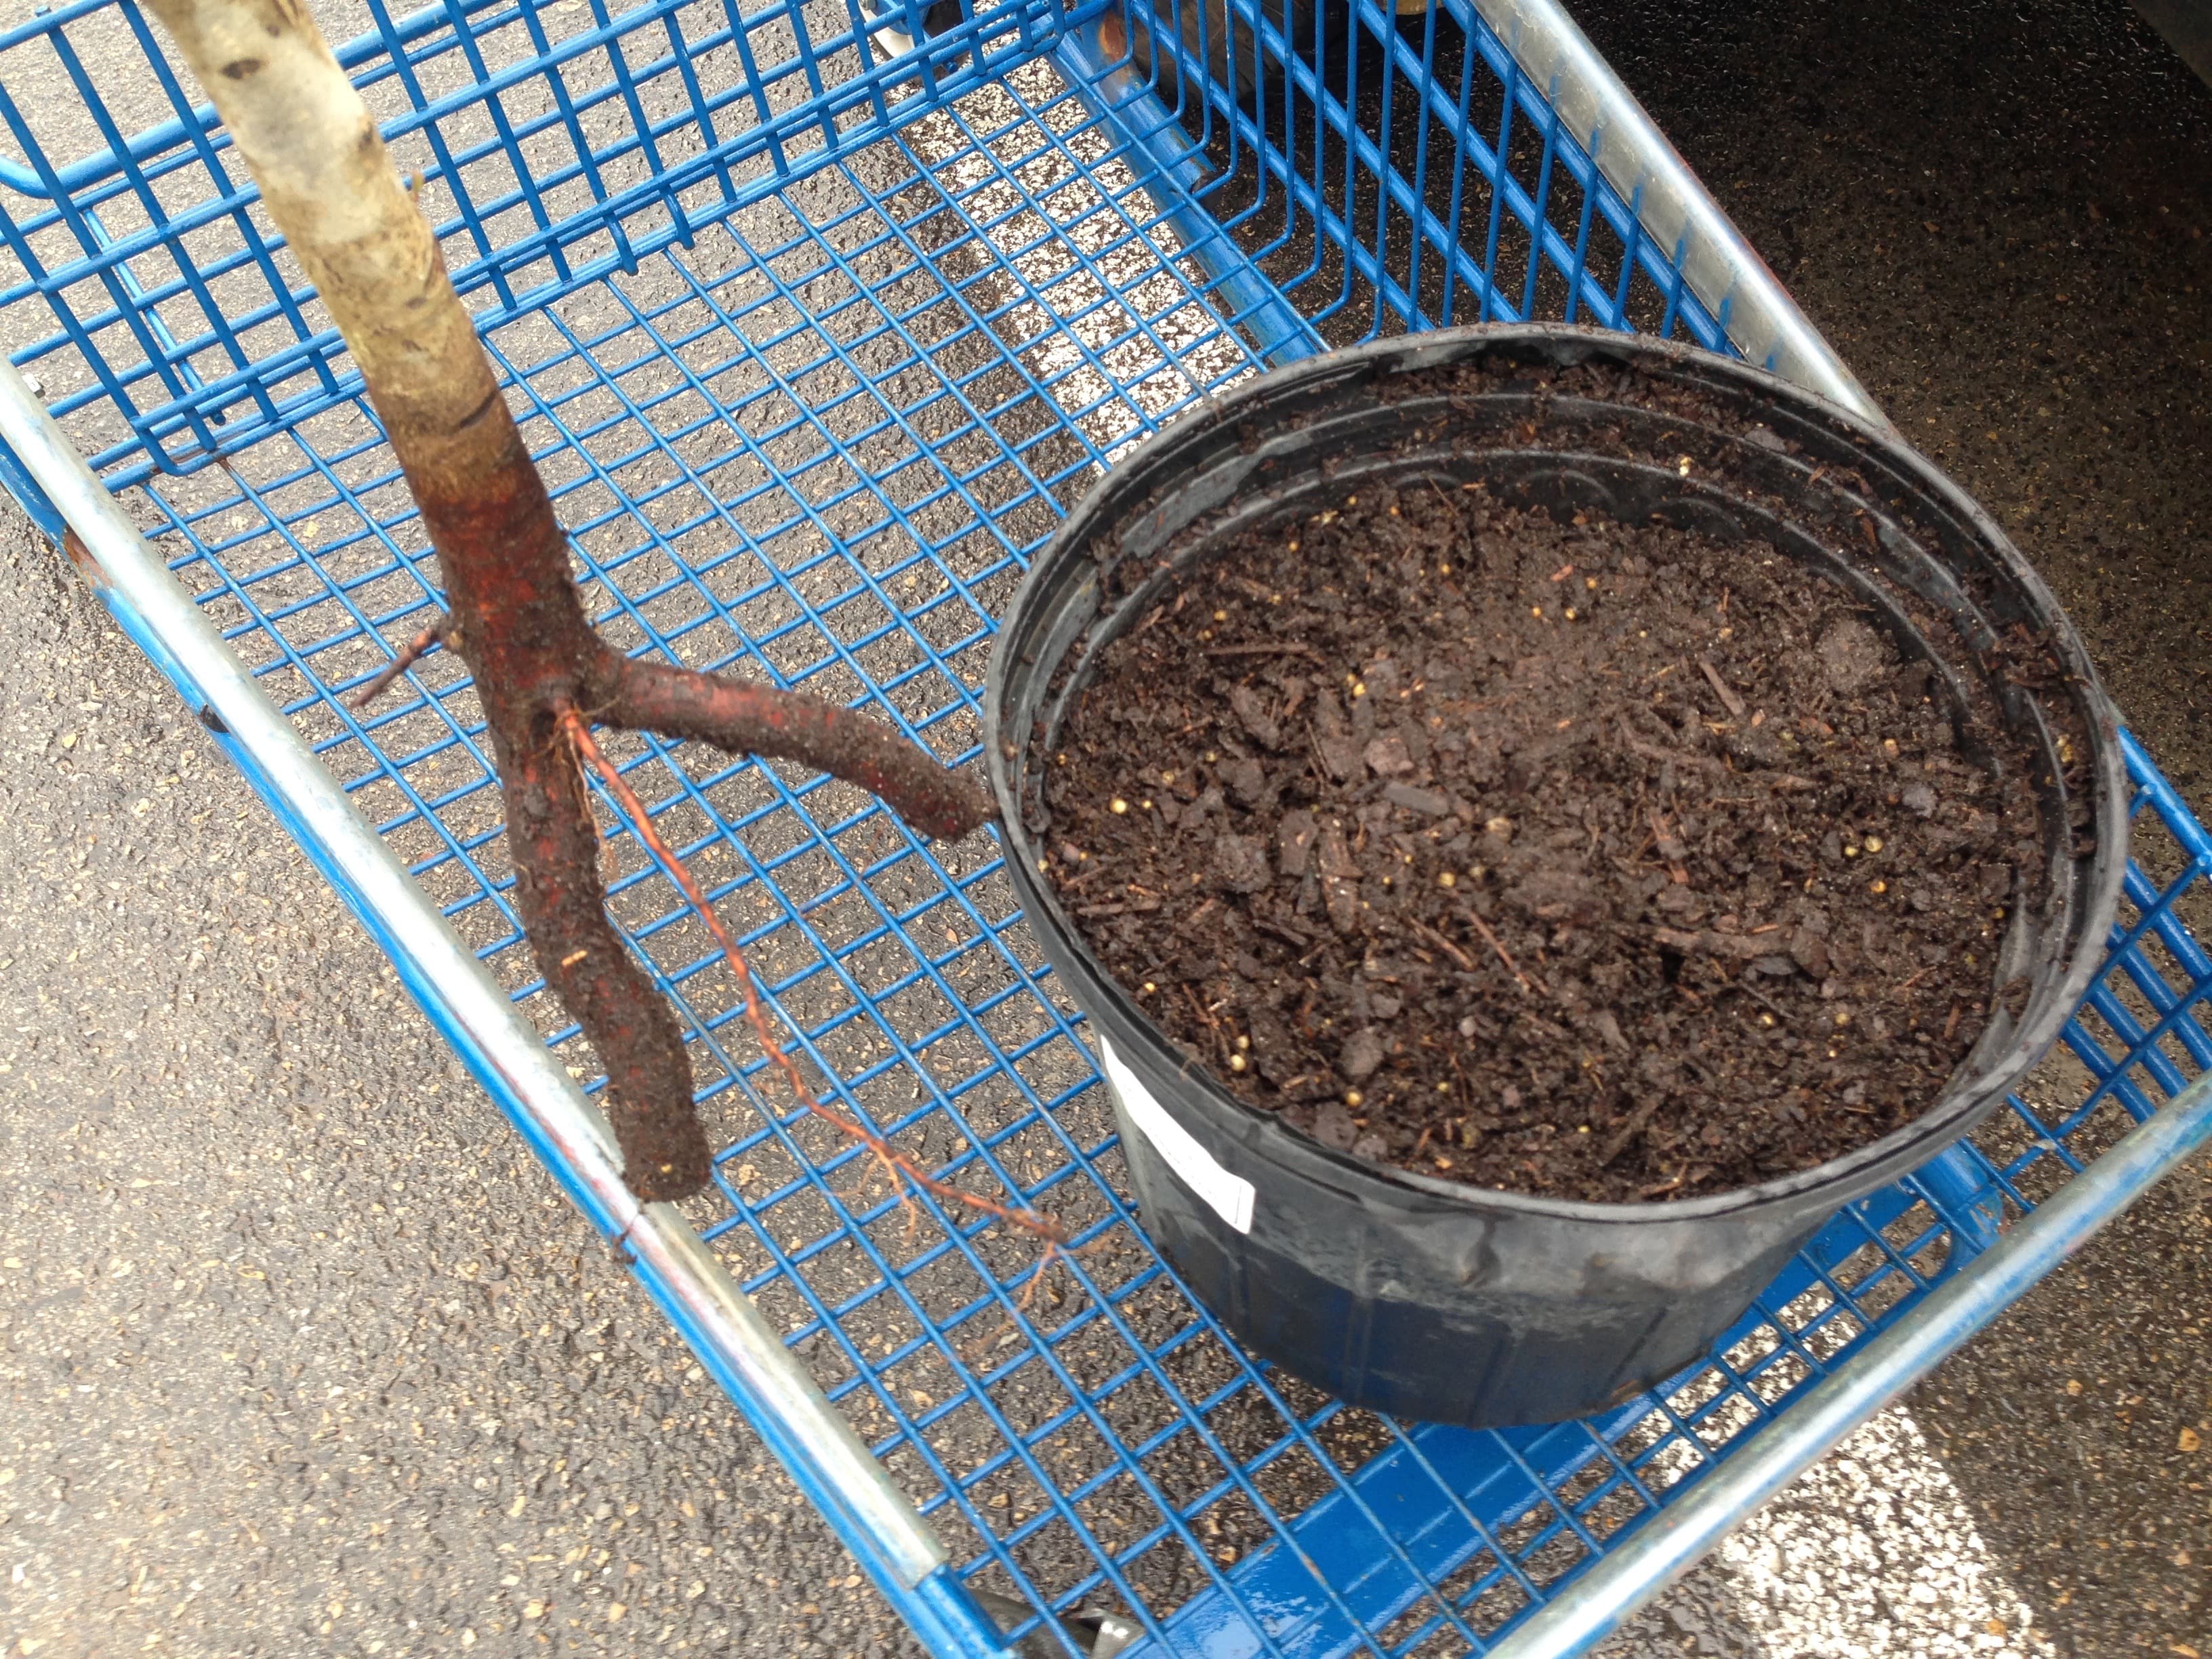 Looking at the roots of a fruit tree that I purchased half off because it wasn't potted well